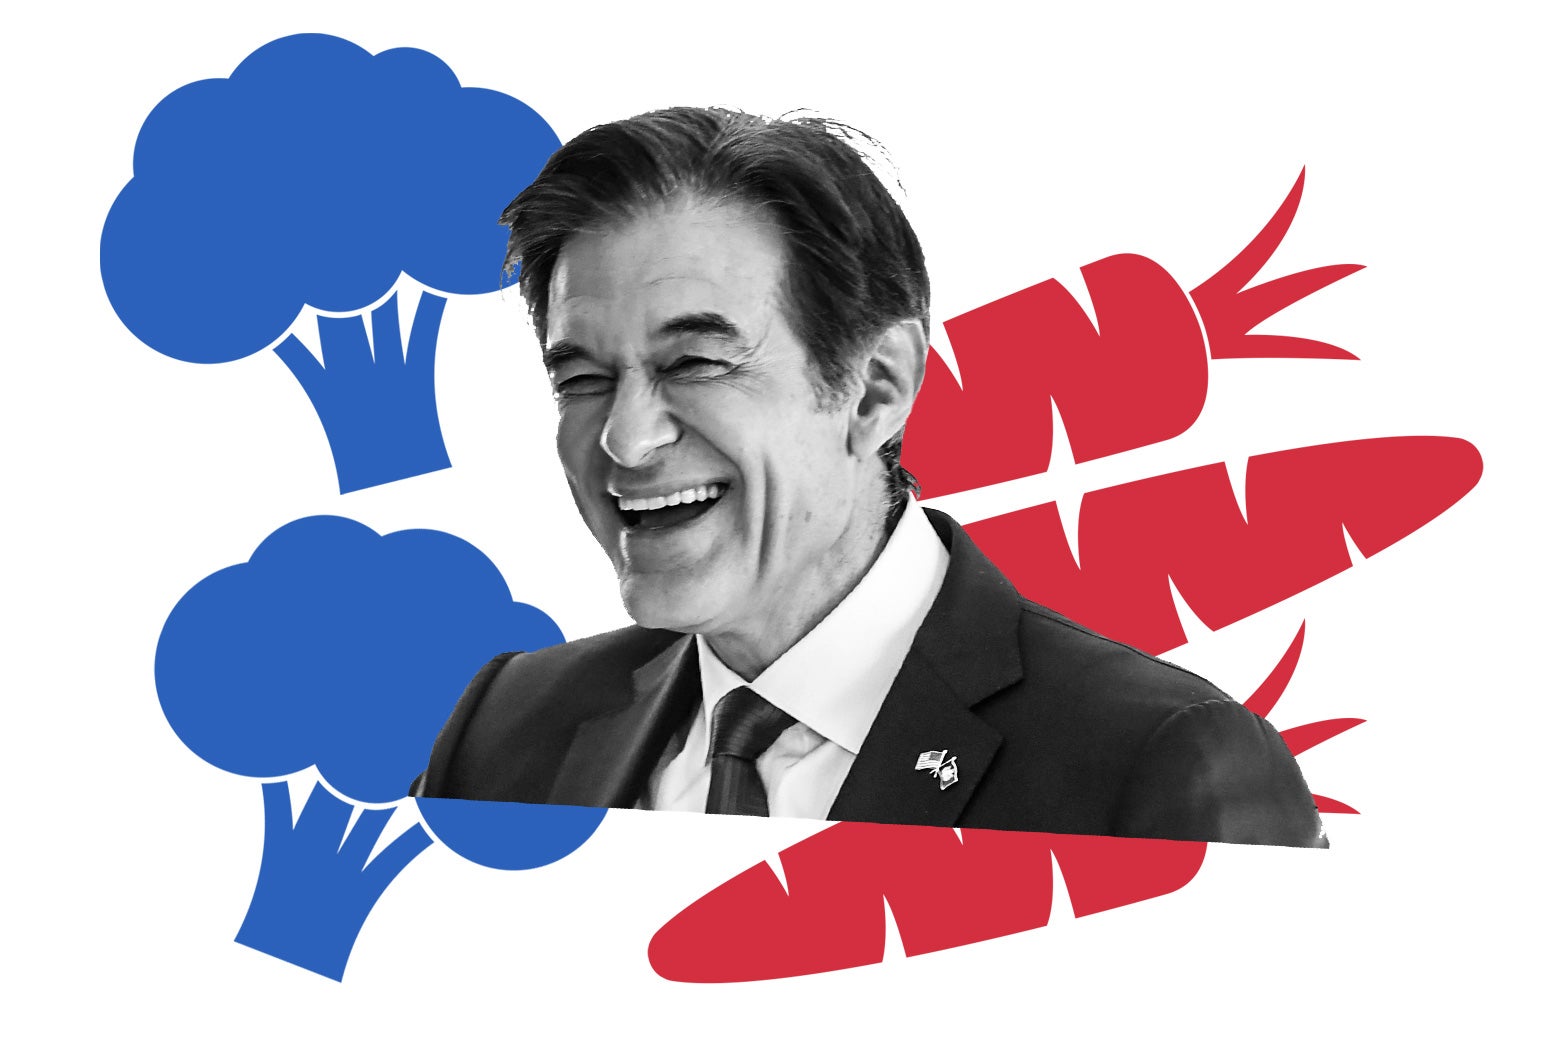 Dr. Oz is seen against a backdrop of two blue broccoli pieces and three red carrots.